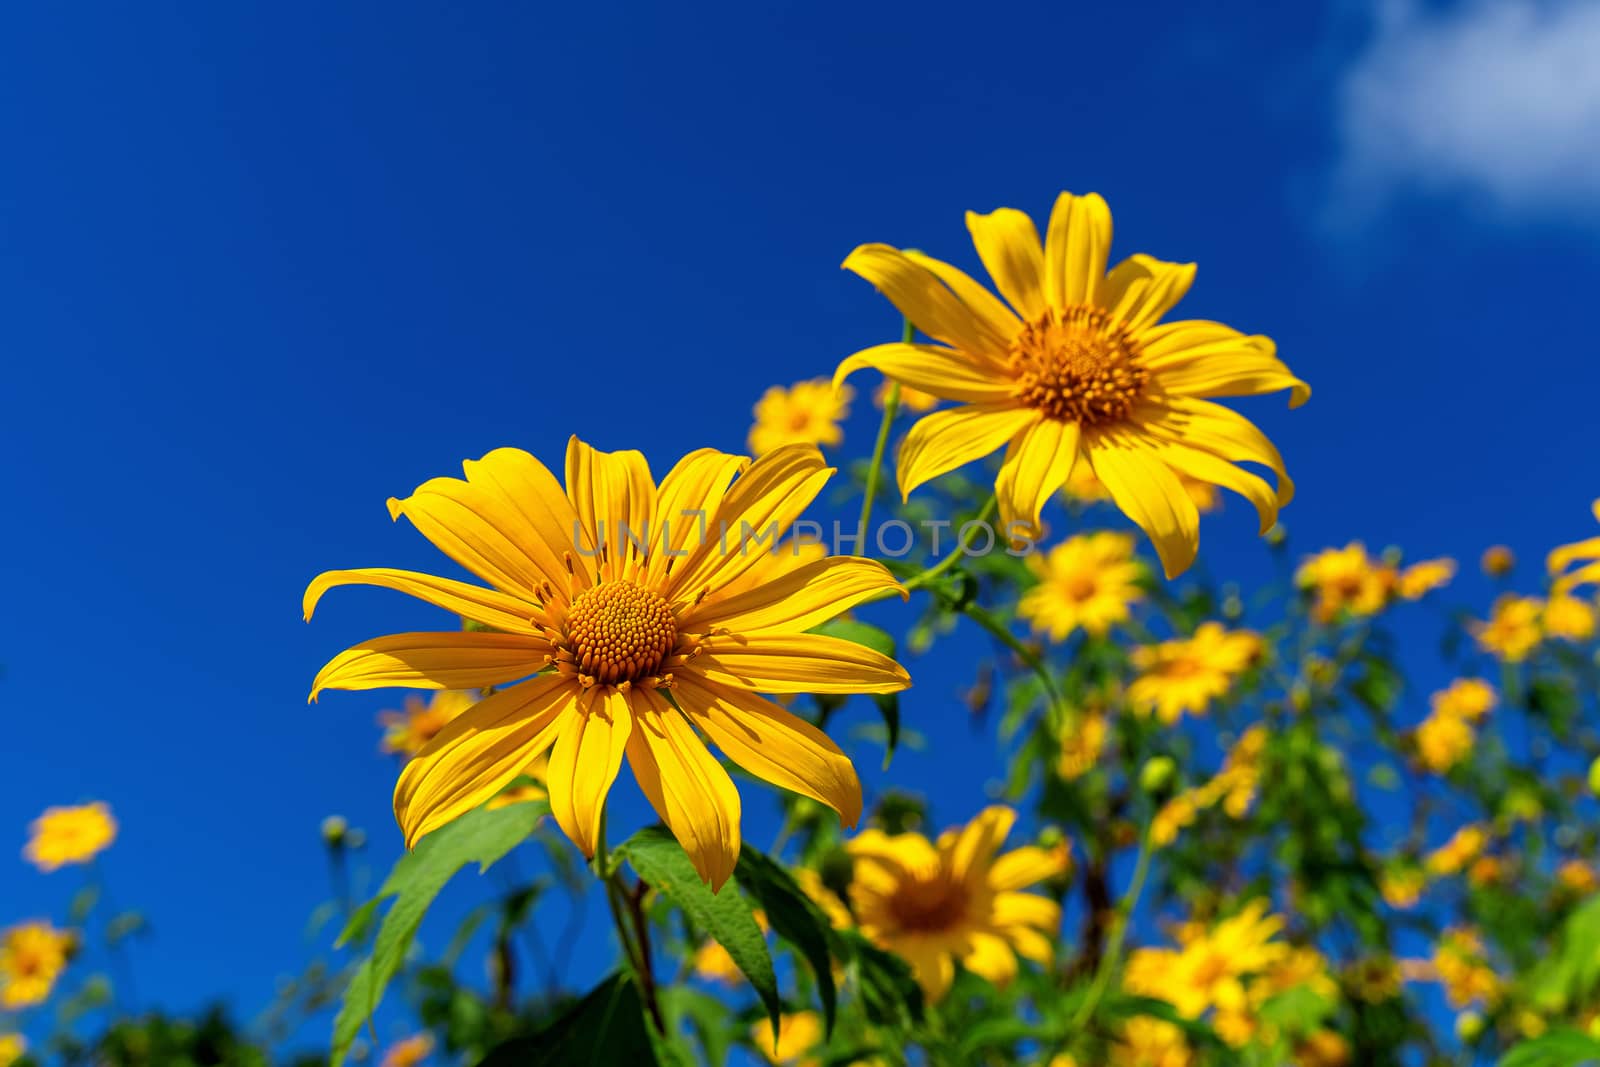 Tree marigold or Mexican flower blooming and blue sky.